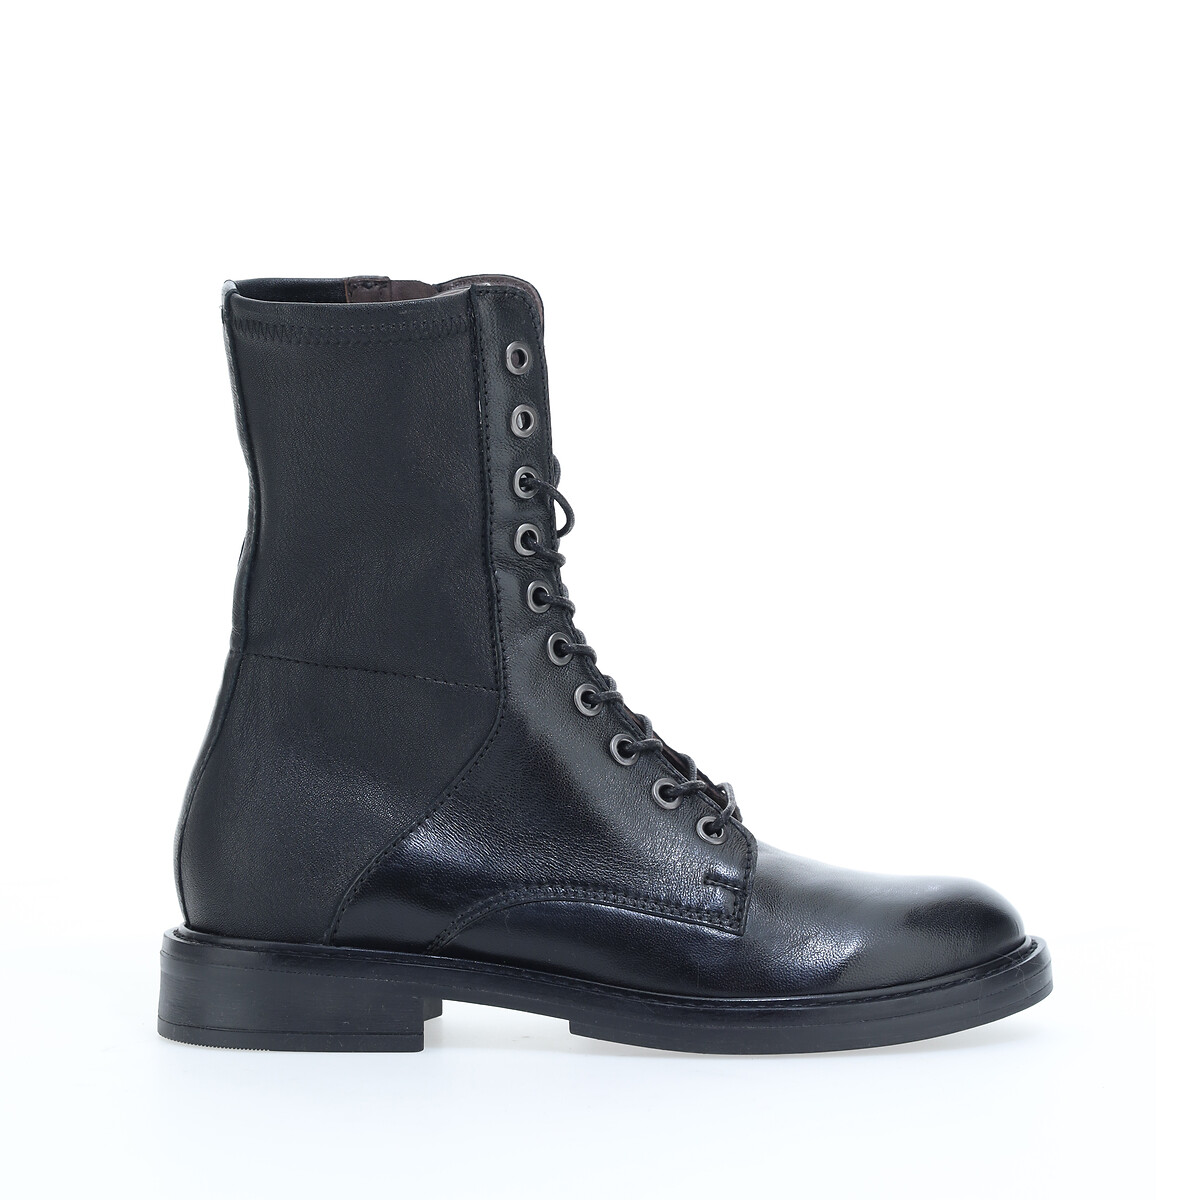 Lace-up ankle boots in leather, black, Mjus | La Redoute